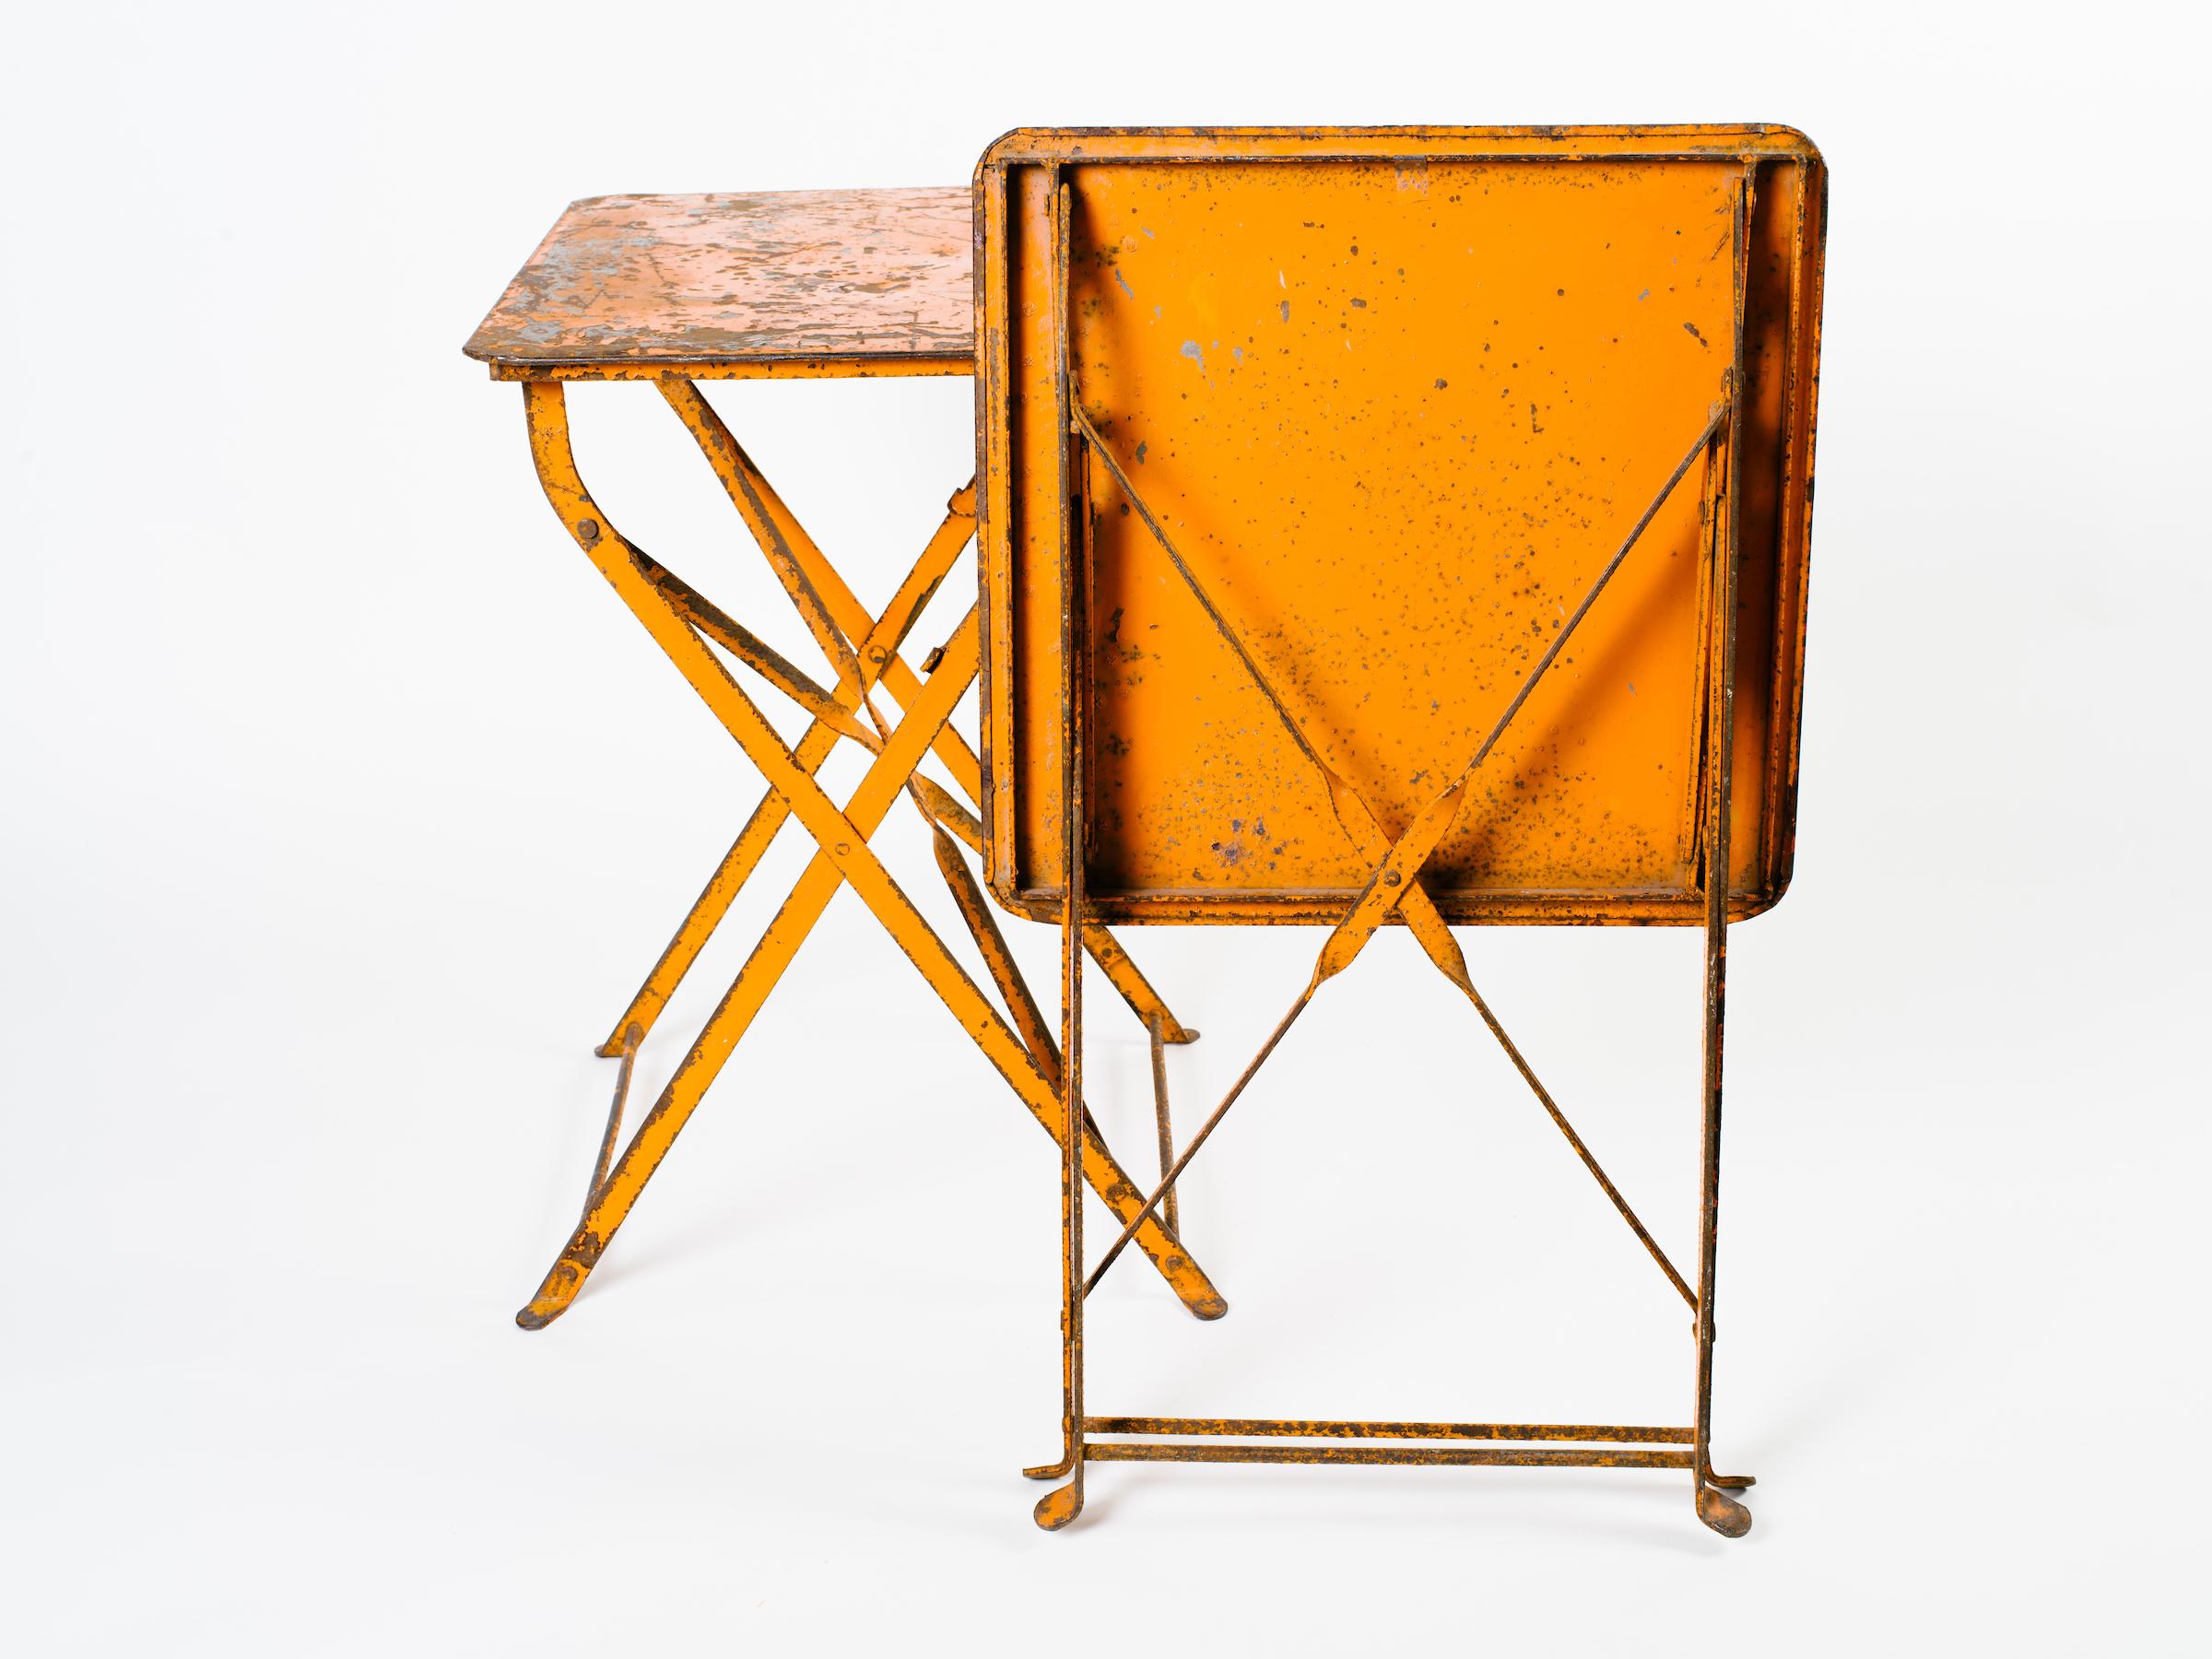 Pair of French Antique Bistro Folding Tables in Distressed Orange Metal, c. 1930 5